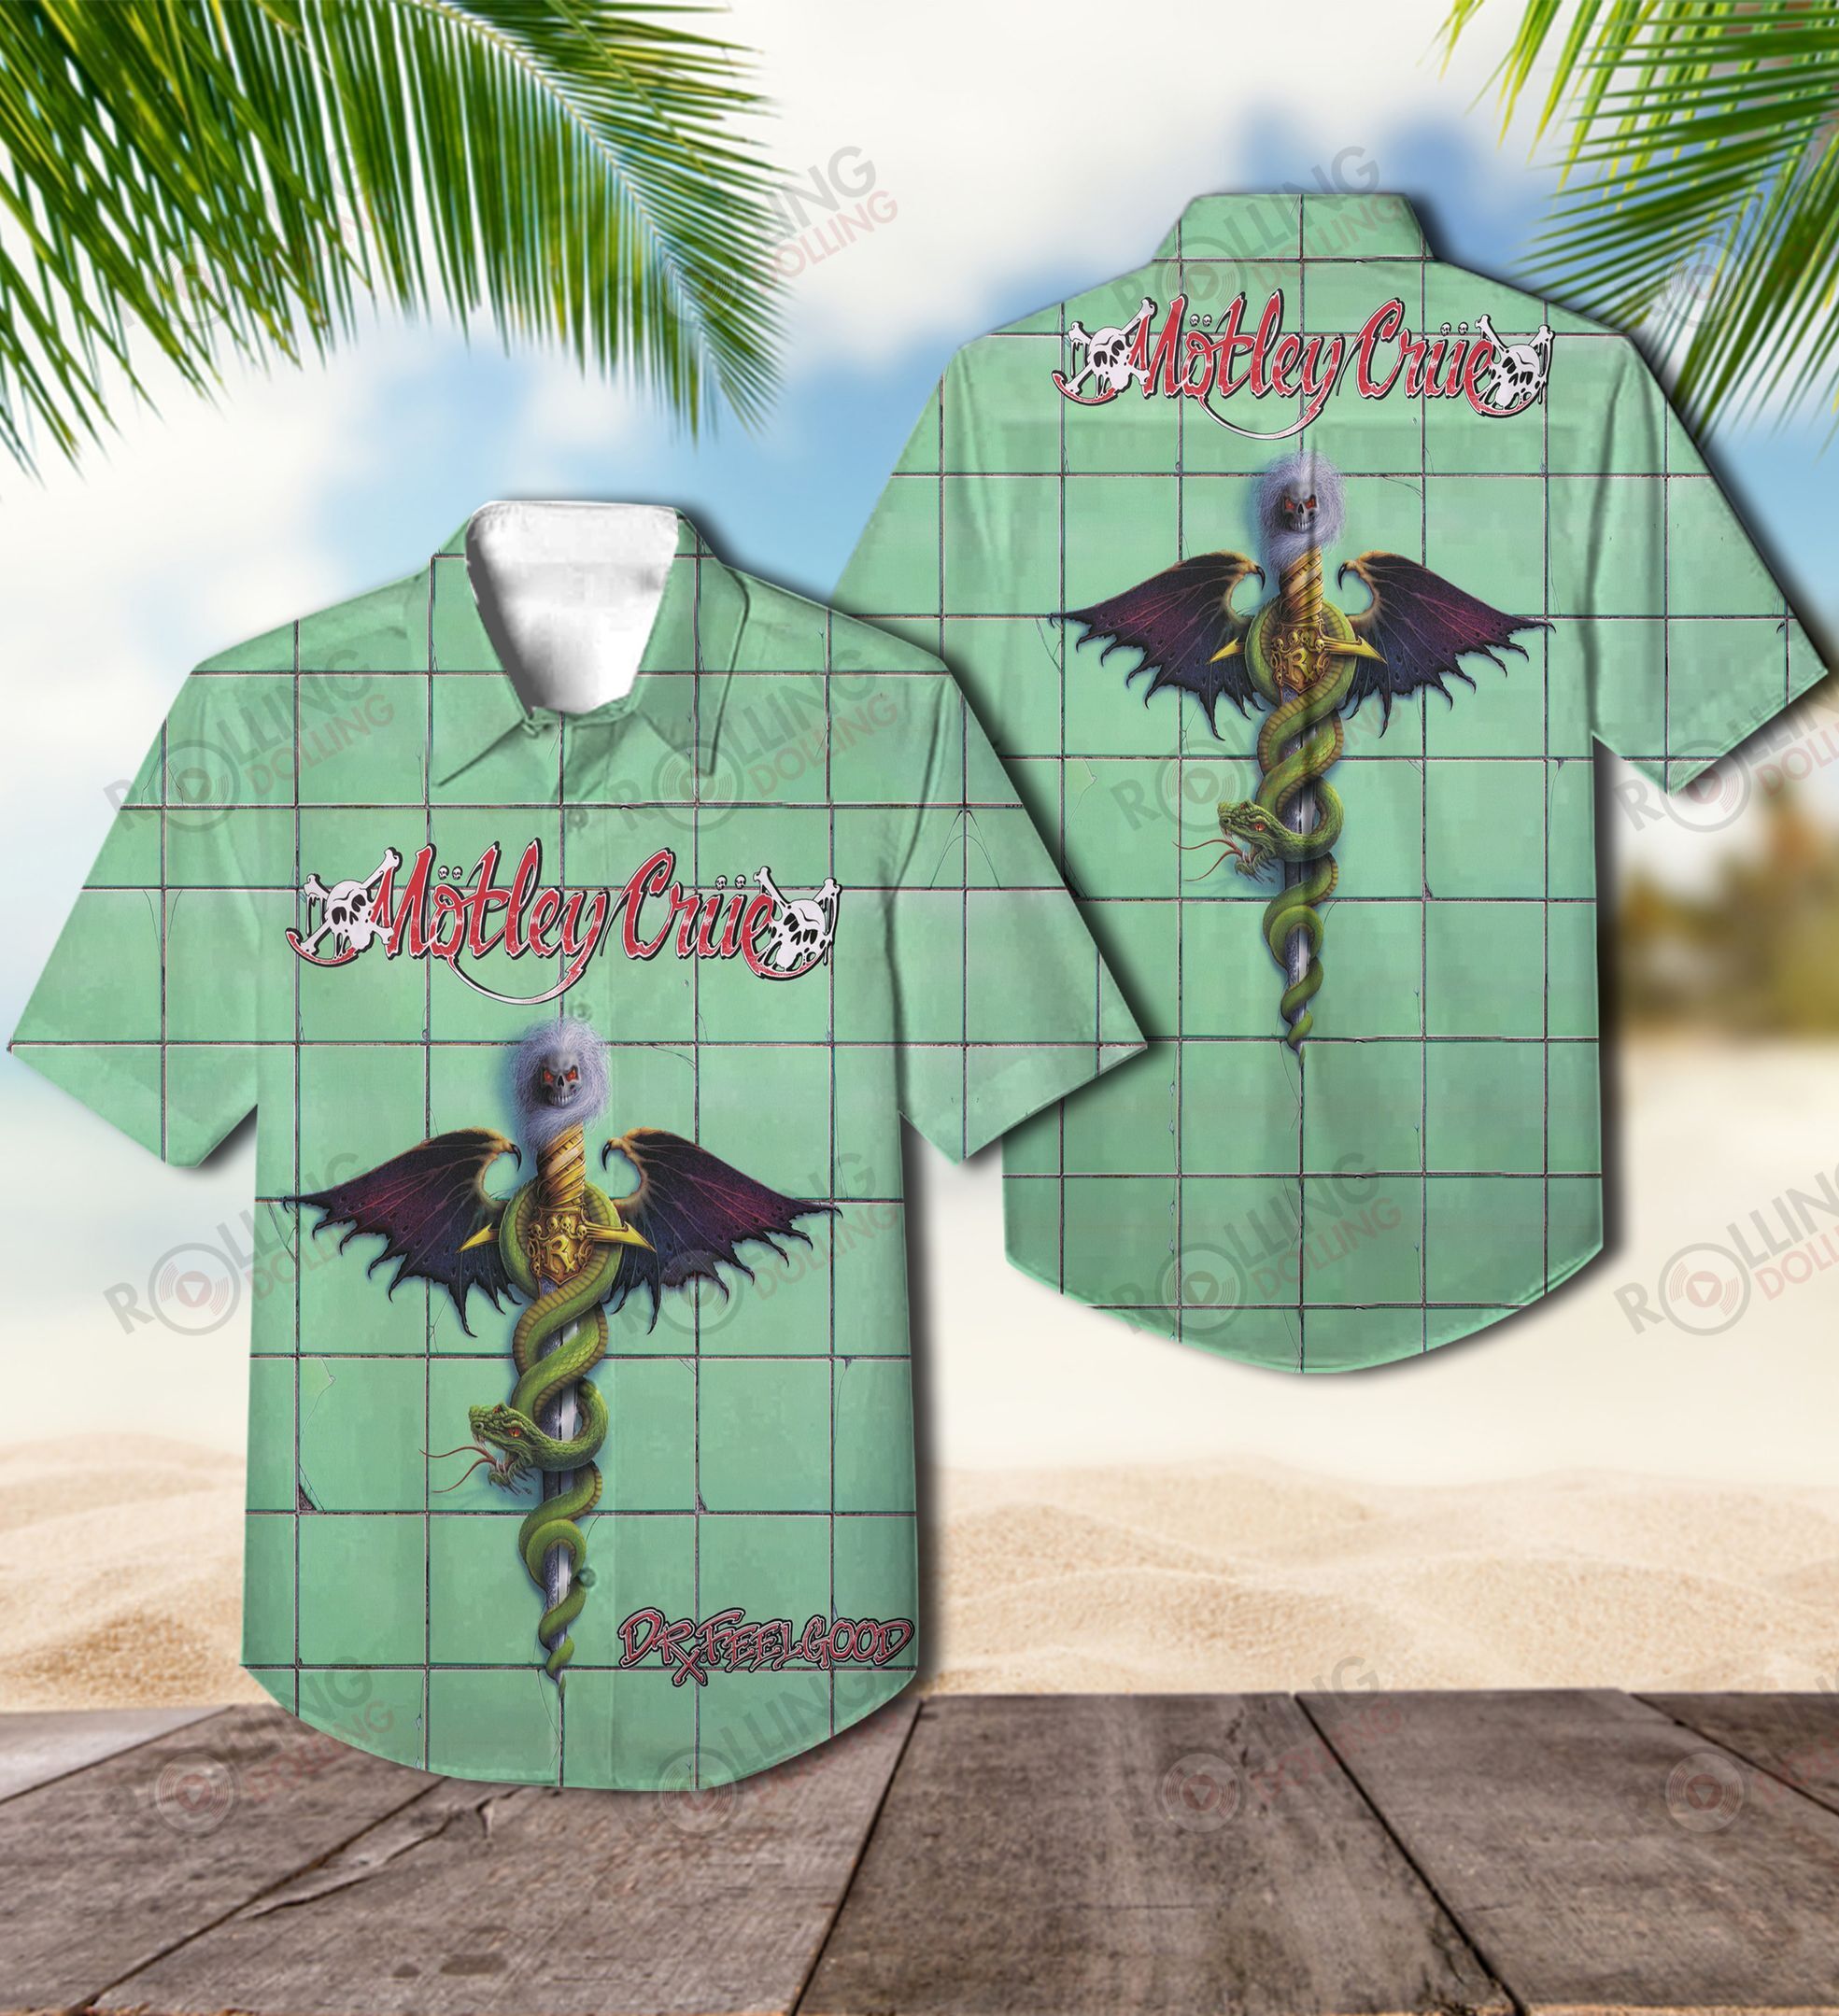 This would make a great gift for any fan who loves Hawaiian Shirt as well as Rock band 86